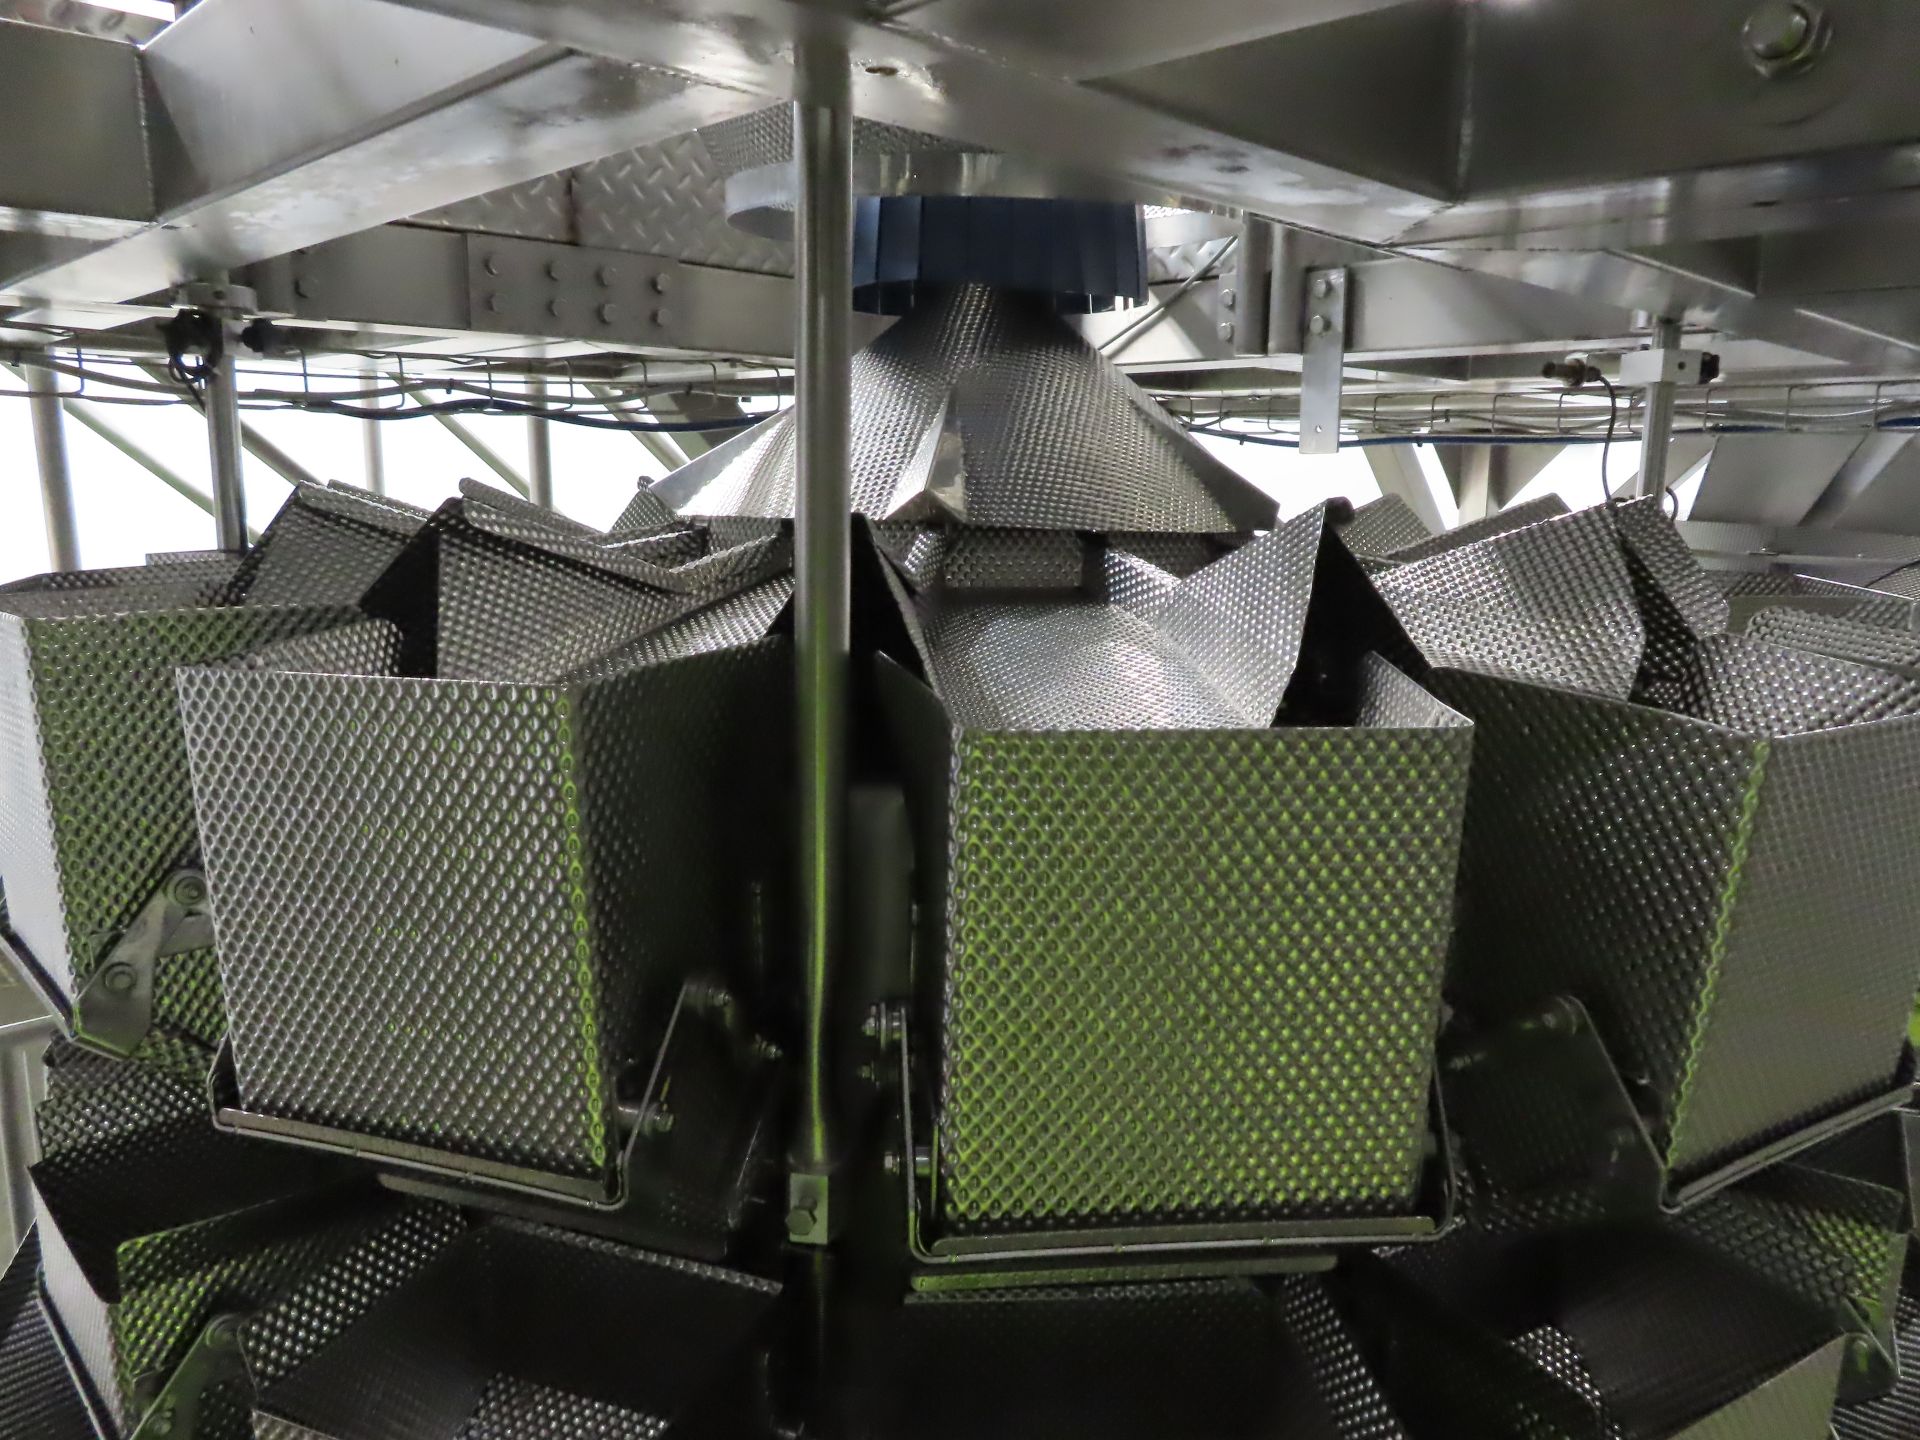 MULTIHEAD WEIGHER. 20-HEAD. YEAR 2018 - Image 3 of 6